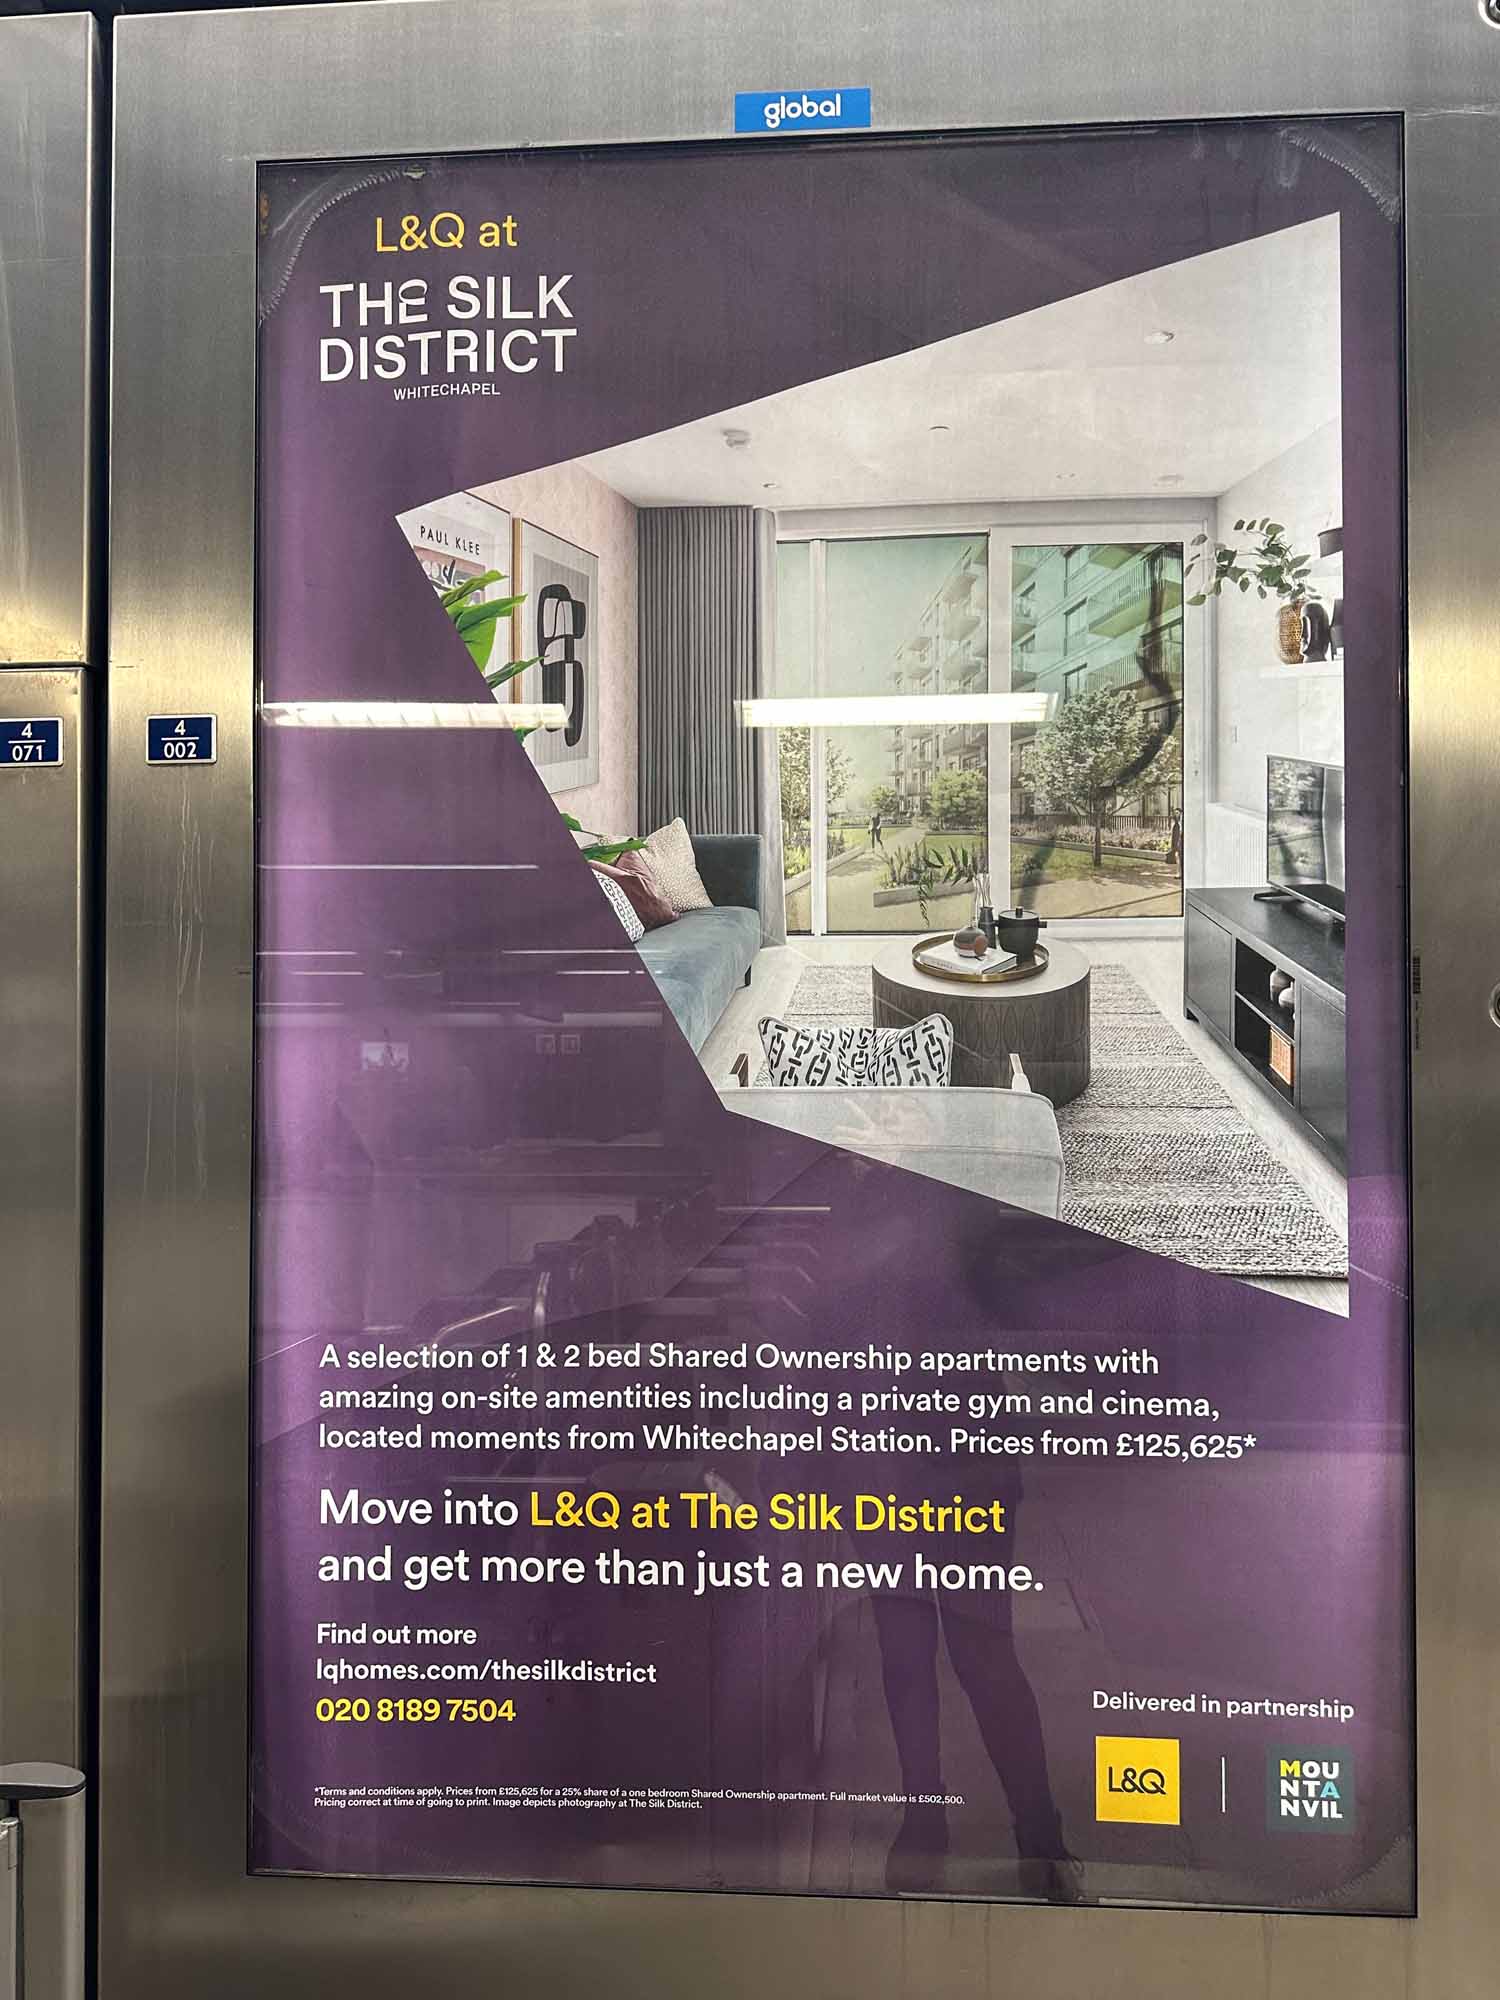 The Silk District ad in Canary Wharf